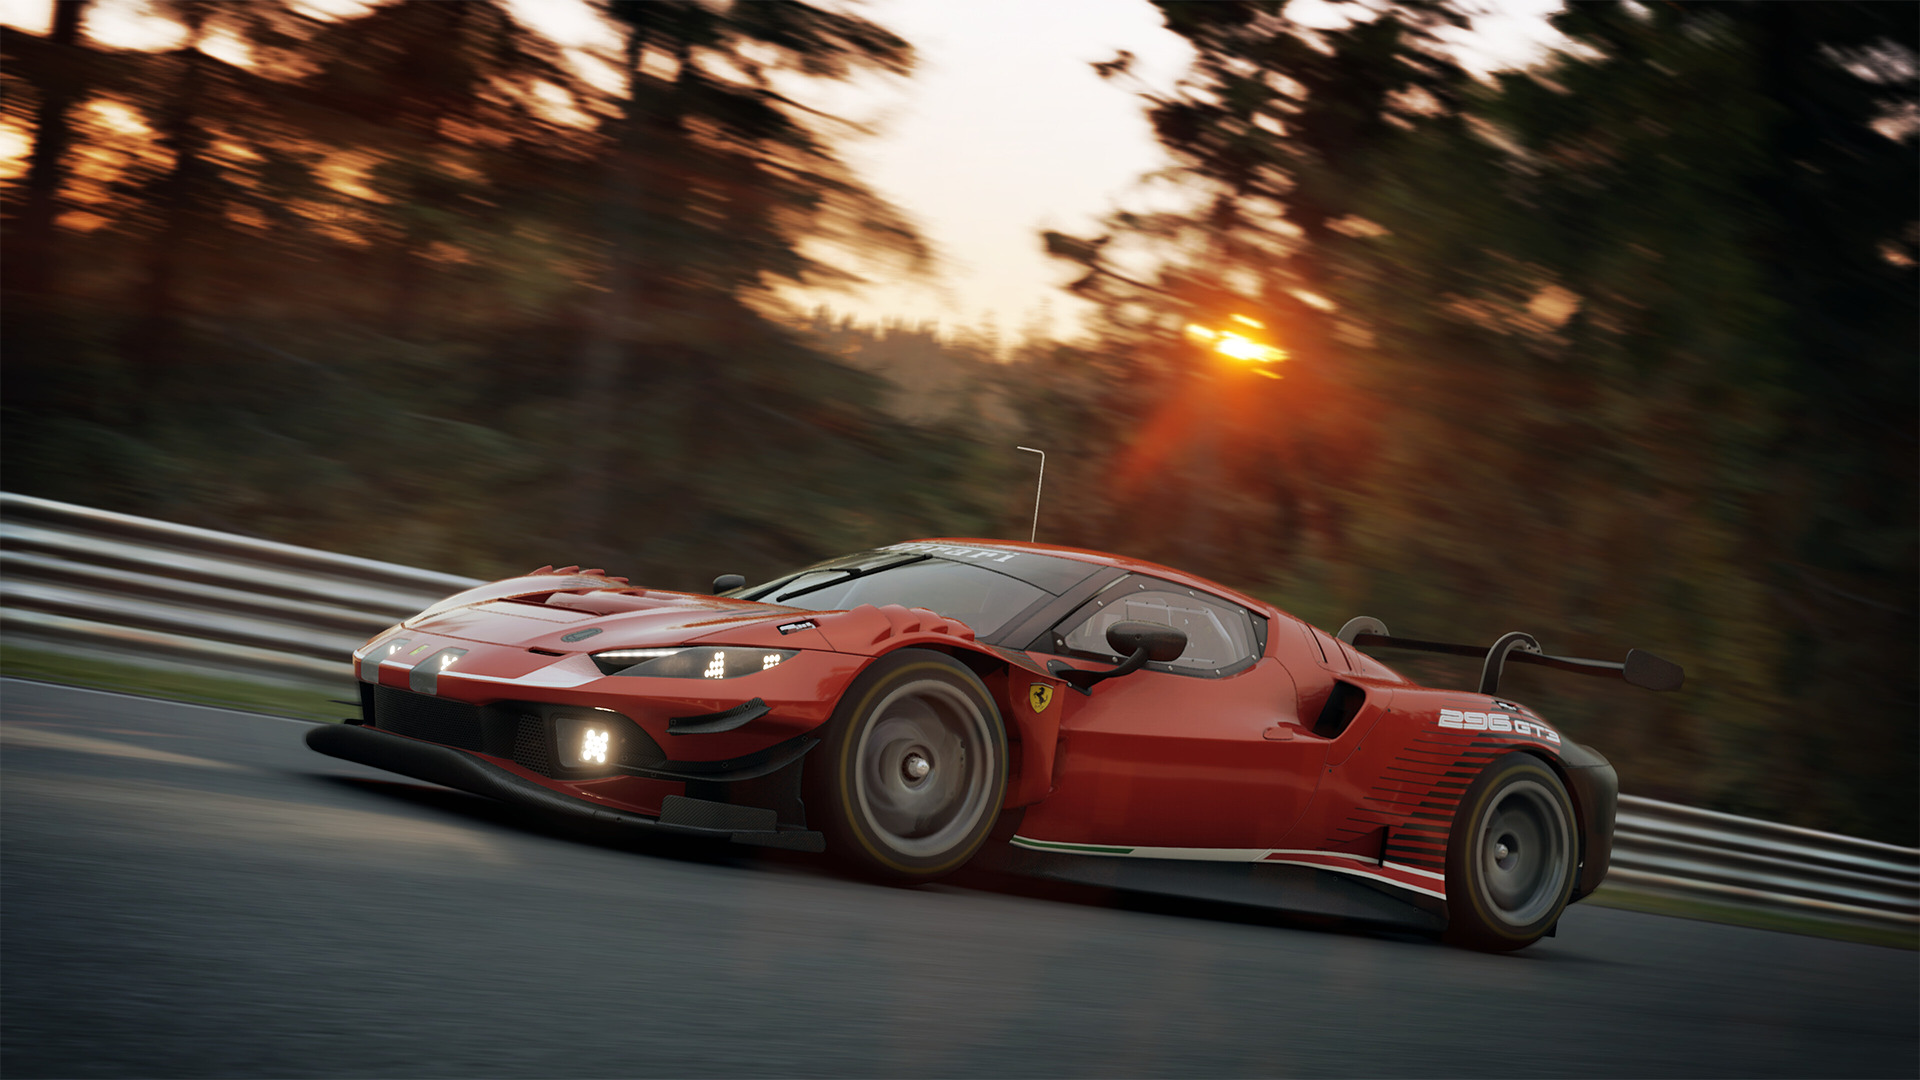 Assetto Corsa Competizione 1.9 update and DLC coming soon to consoles